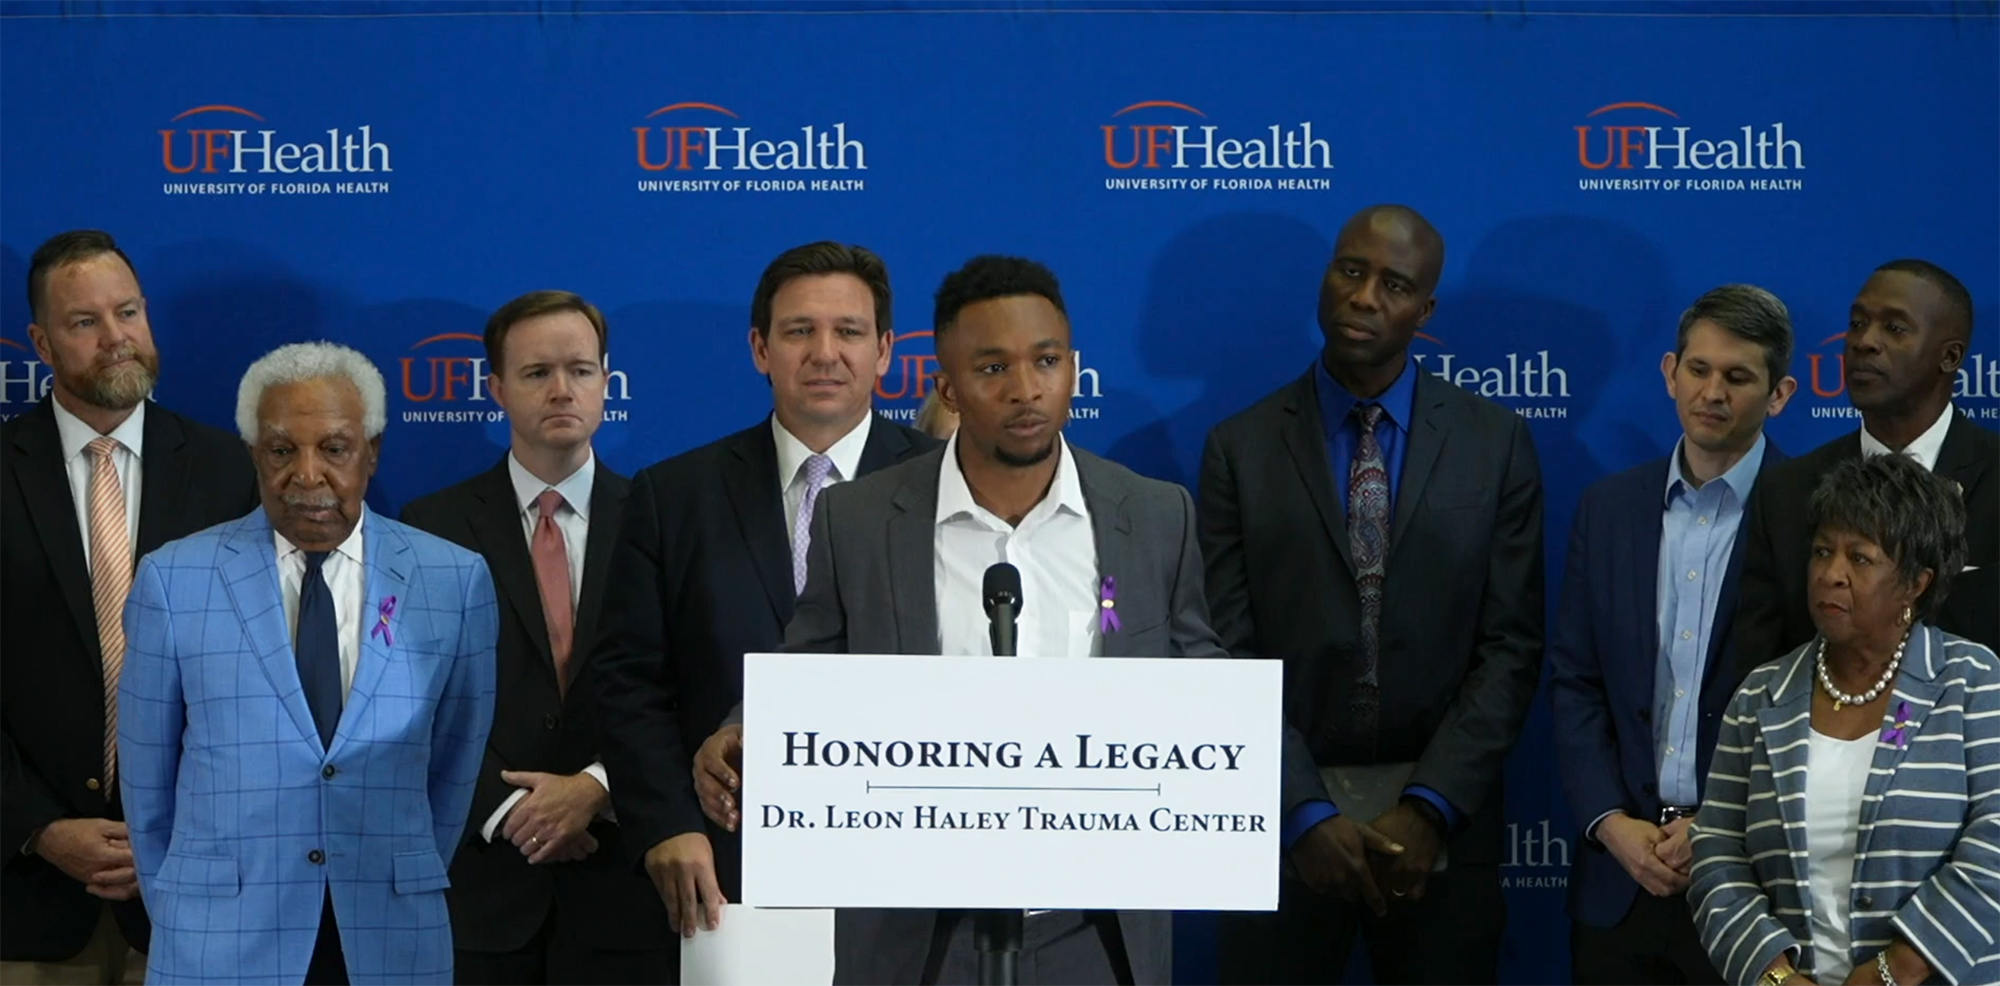 Leon Haley's son, Grant Haley, a defensive back for the Los Angeles Rams, speaks at the news conference April 18 backed by his family, UF Health officials and Florida Gov. Ron DeSantis.